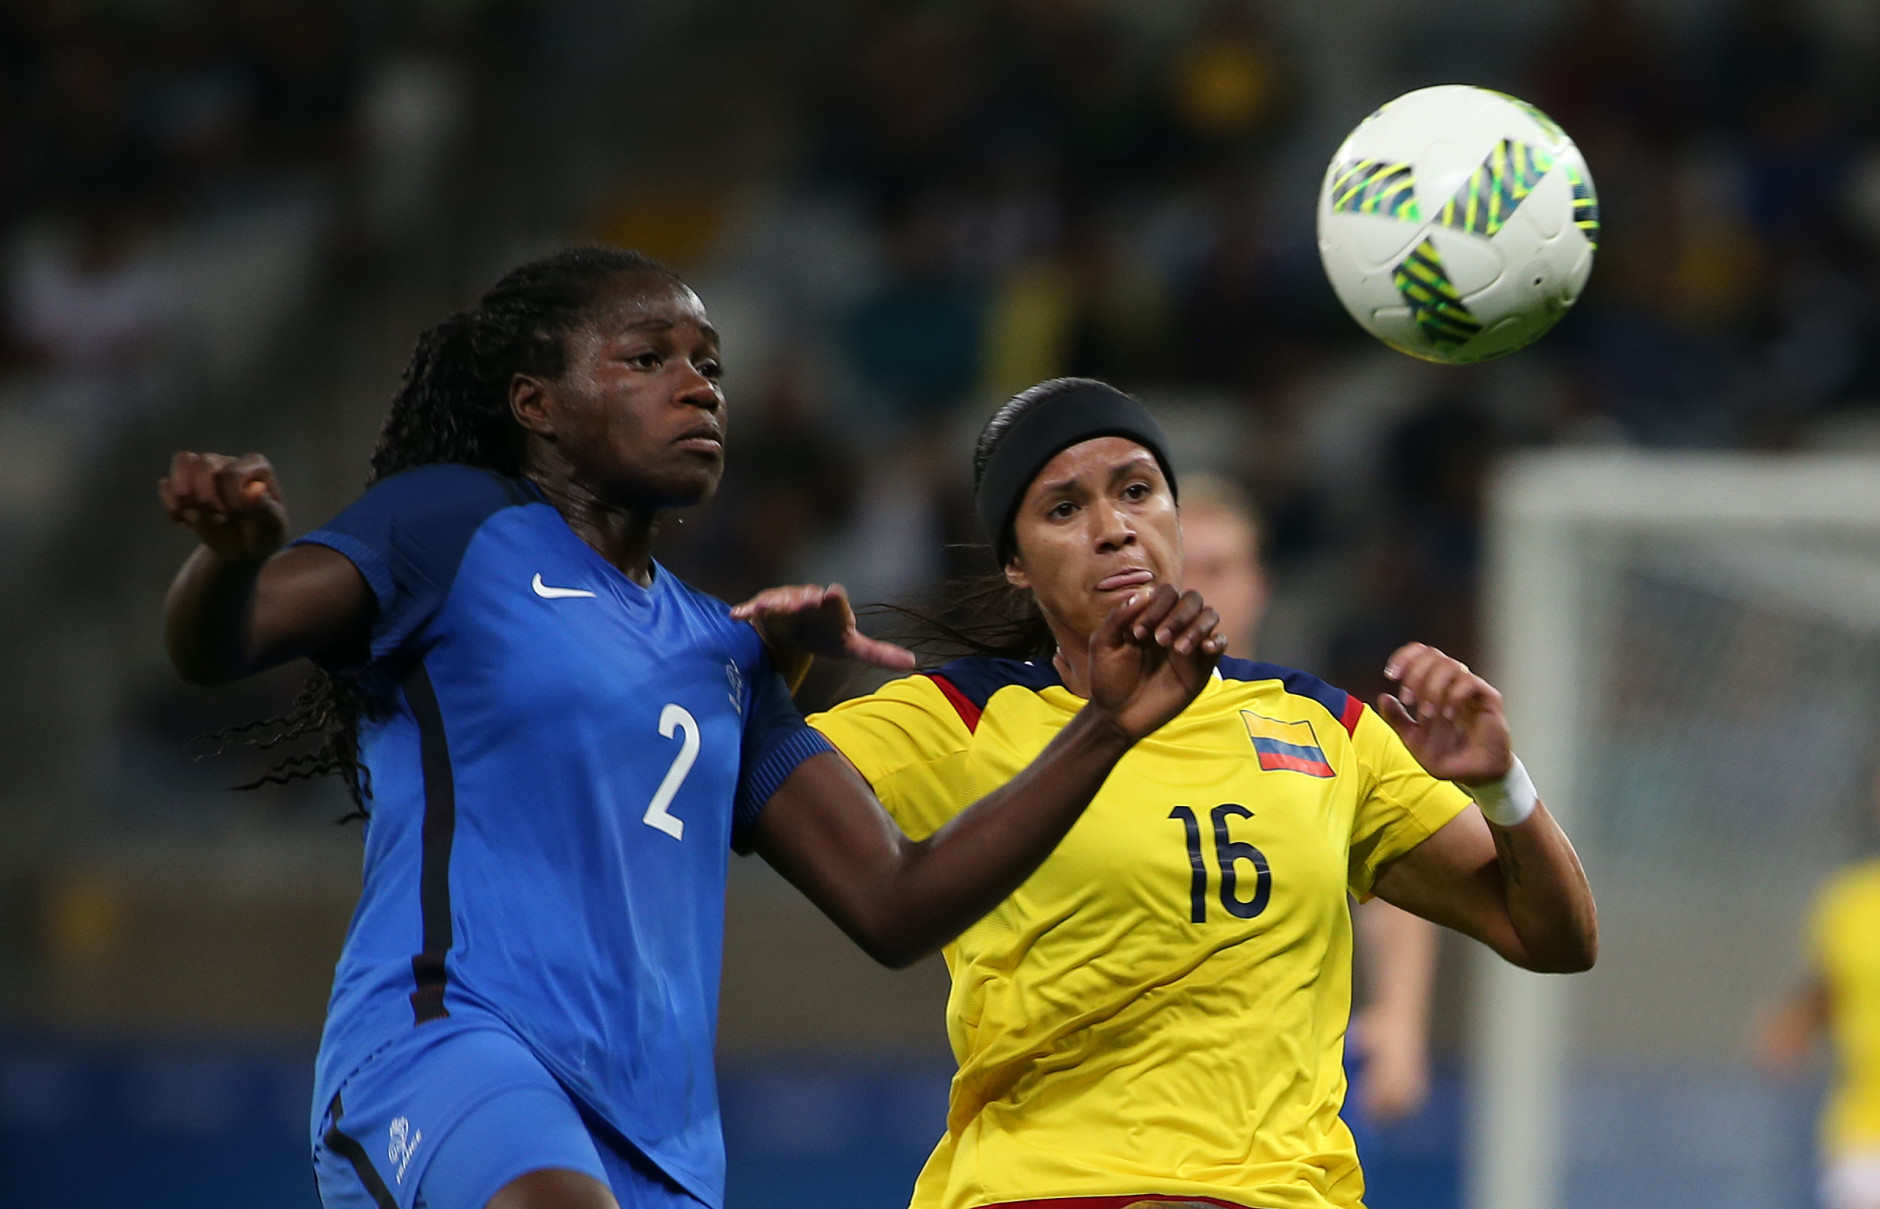 France's Griedge Mbock Bathy, left, fights for the ball with Colombia's Lady Andrade during the Women's Olympic Football Tournament at the Mineirao stadium in Belo Horizonte, Brazil, Wednesday, Aug. 3, 2016. (AP Photo/Eugenio Savio)